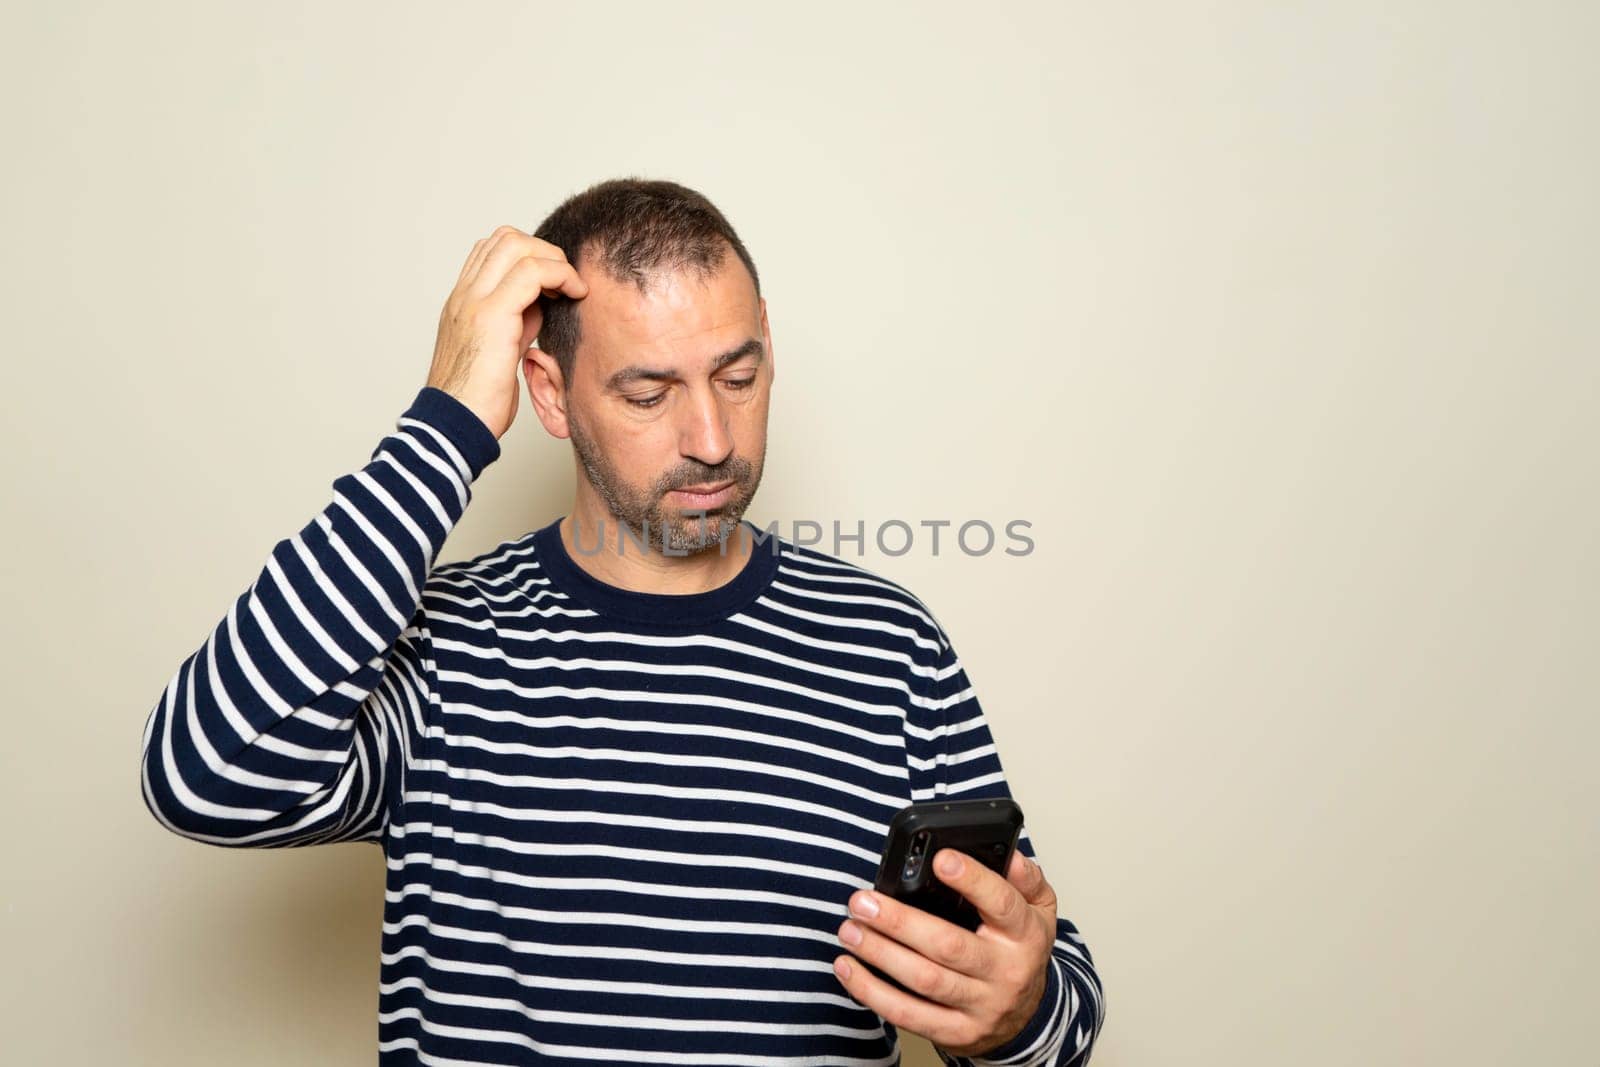 Bearded Hispanic man in his 40s wearing a striped sweater scratching his head while searching for the solution to a problem on his smartphone isolated over beige background. by Barriolo82